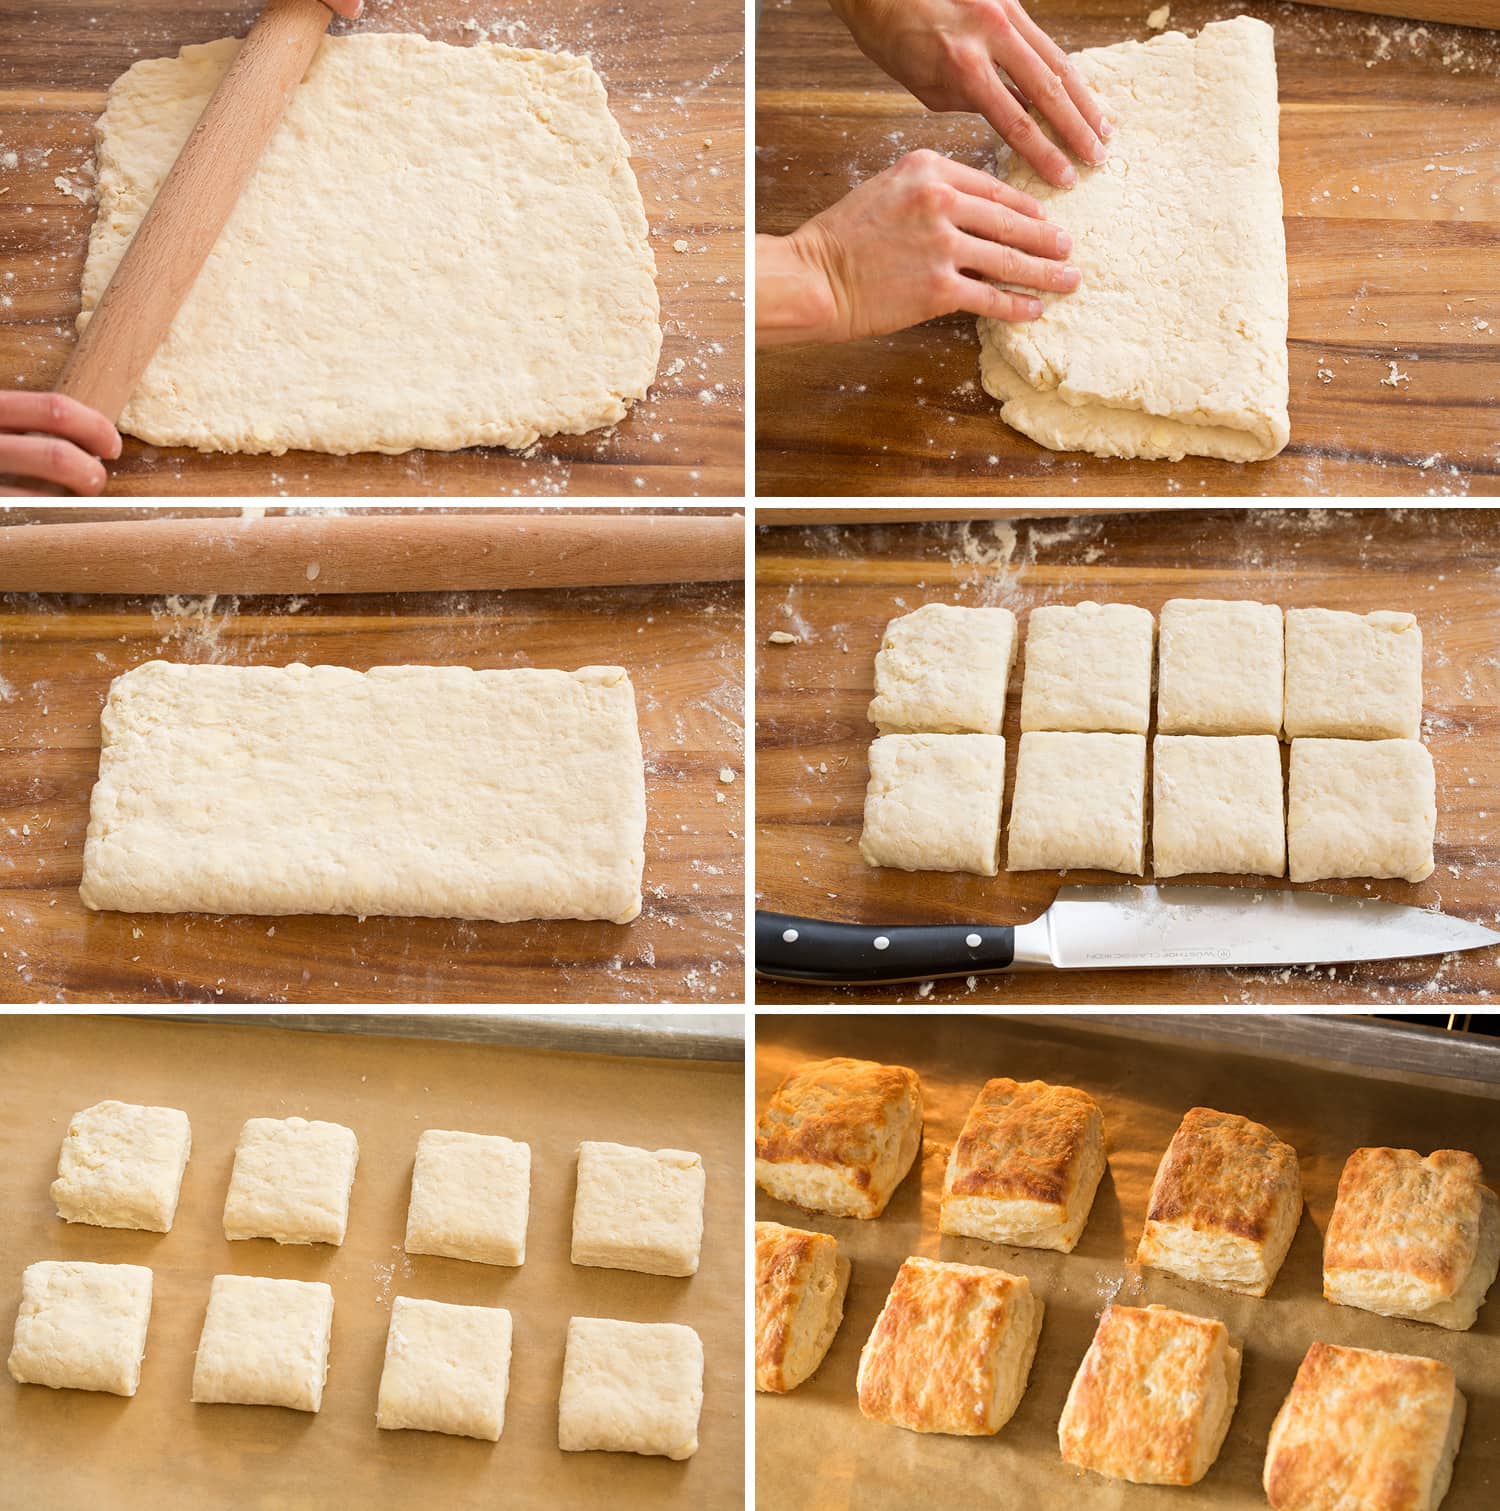 Folding and cutting biscuits and baking.